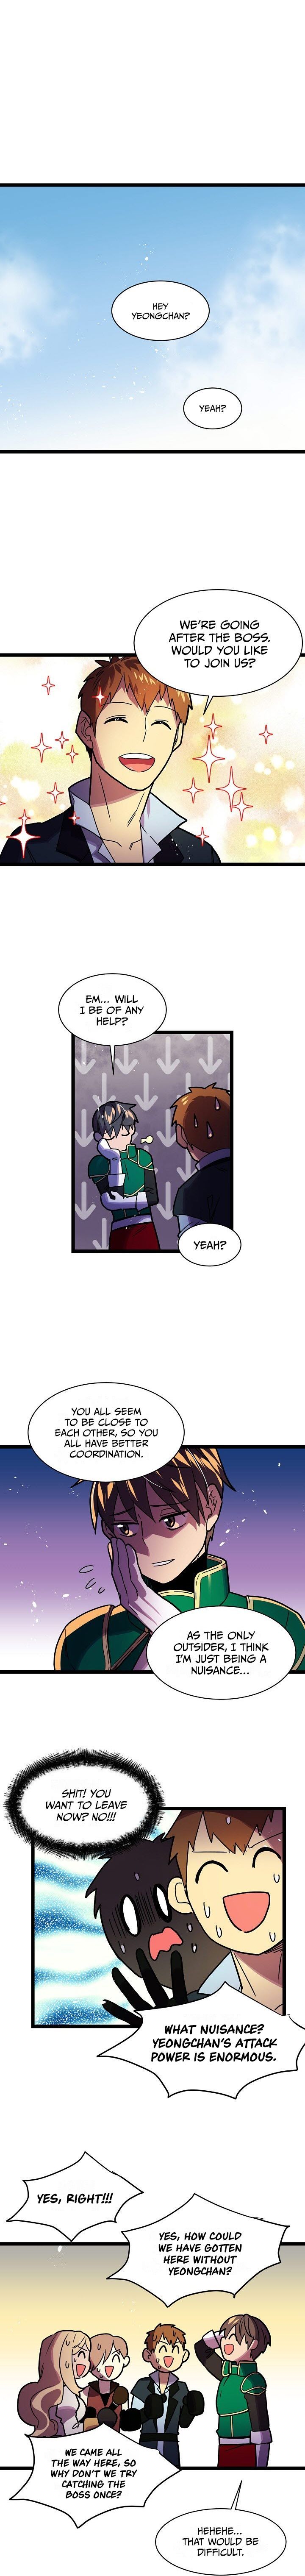 Ranker's Return Chapter 16 page 2